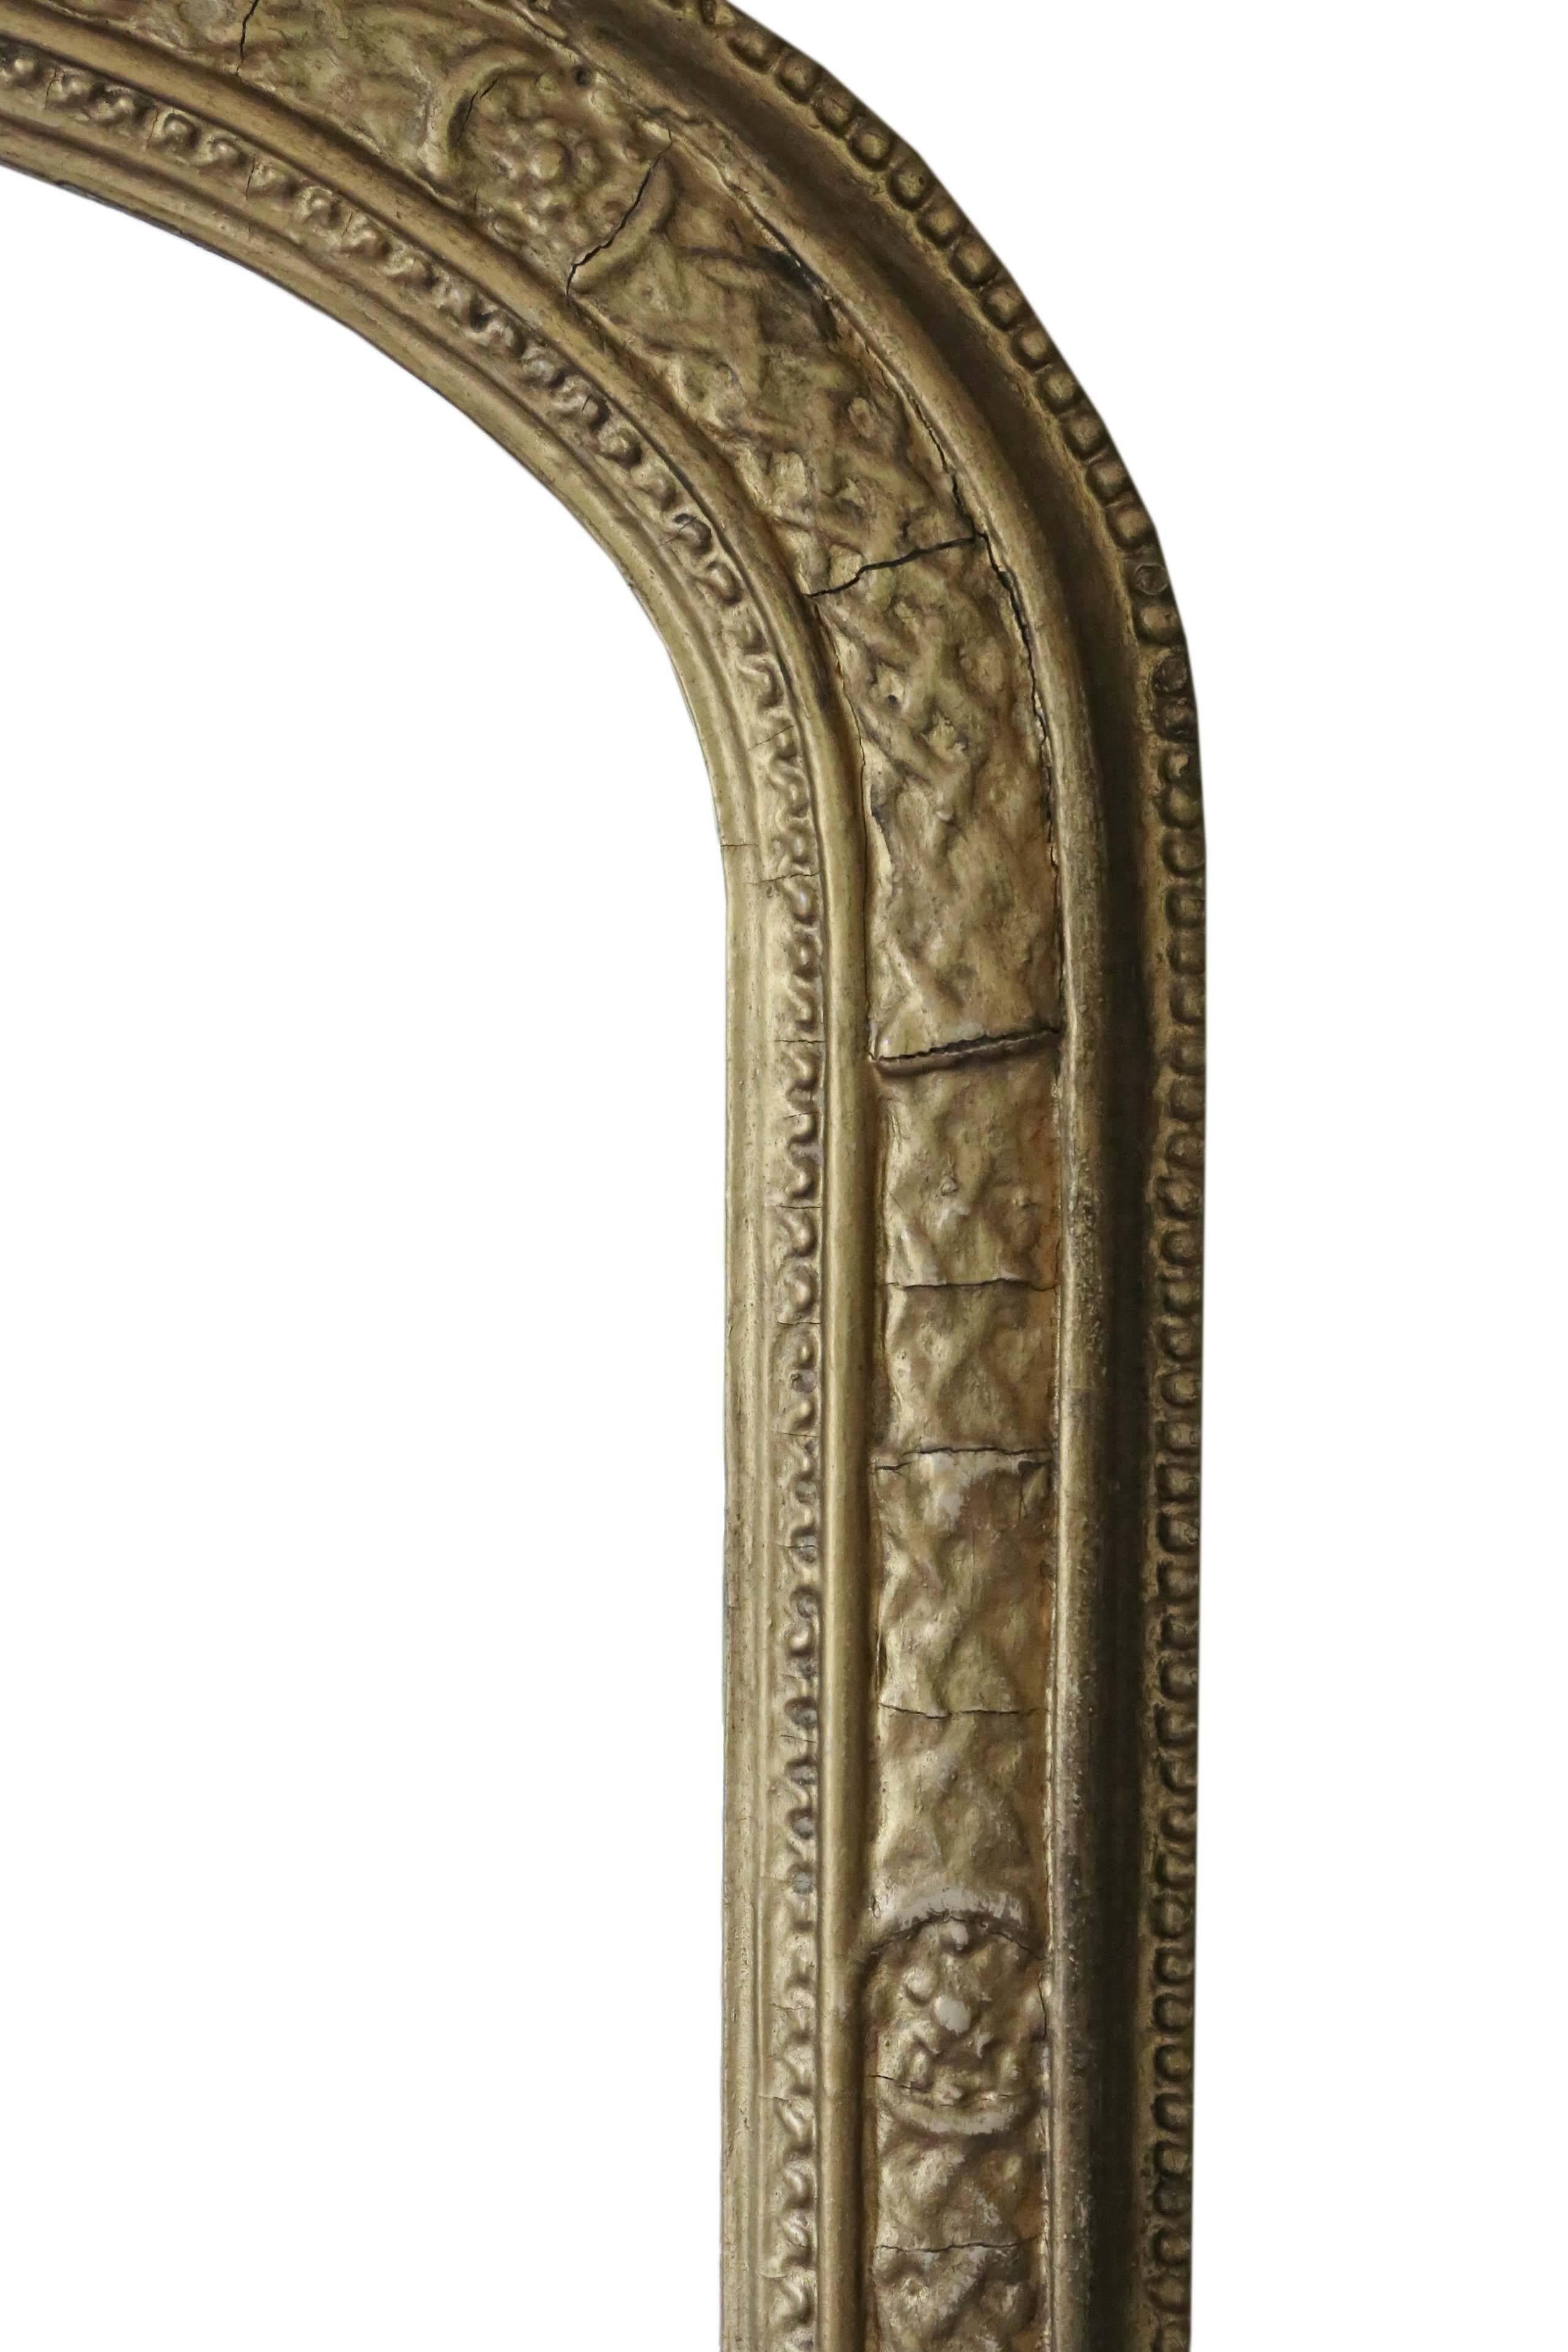 Antique Victorian Gilt Wall Mirror or Overmantle, circa 1880 For Sale 1